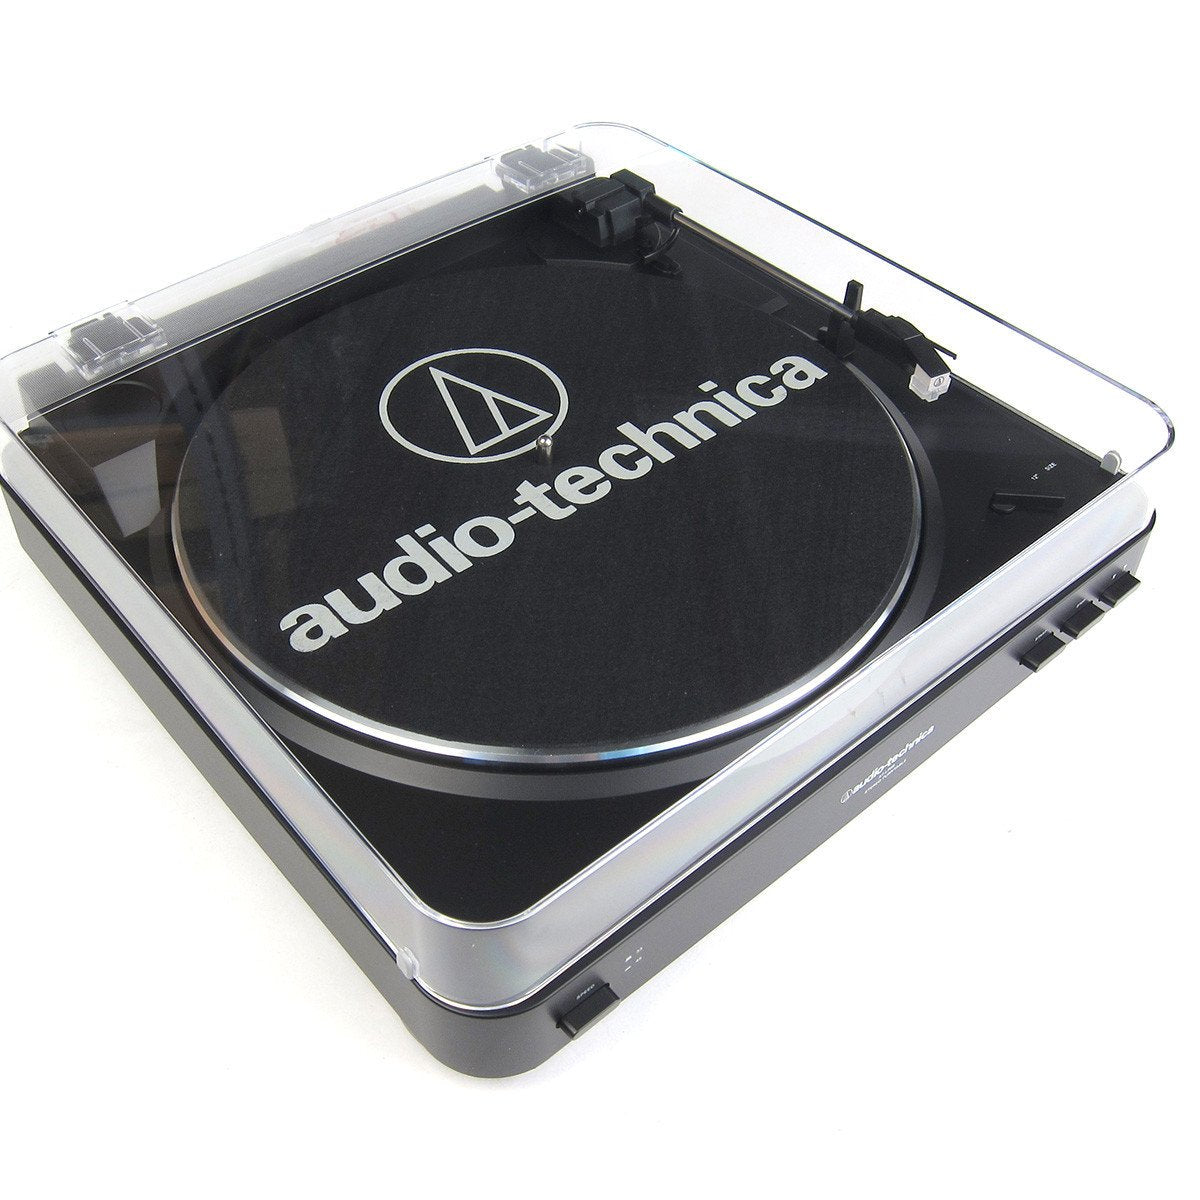 Audio-Technica: AT-LP60BK-USB Automatic Turntable - Black (Discontinued Model)